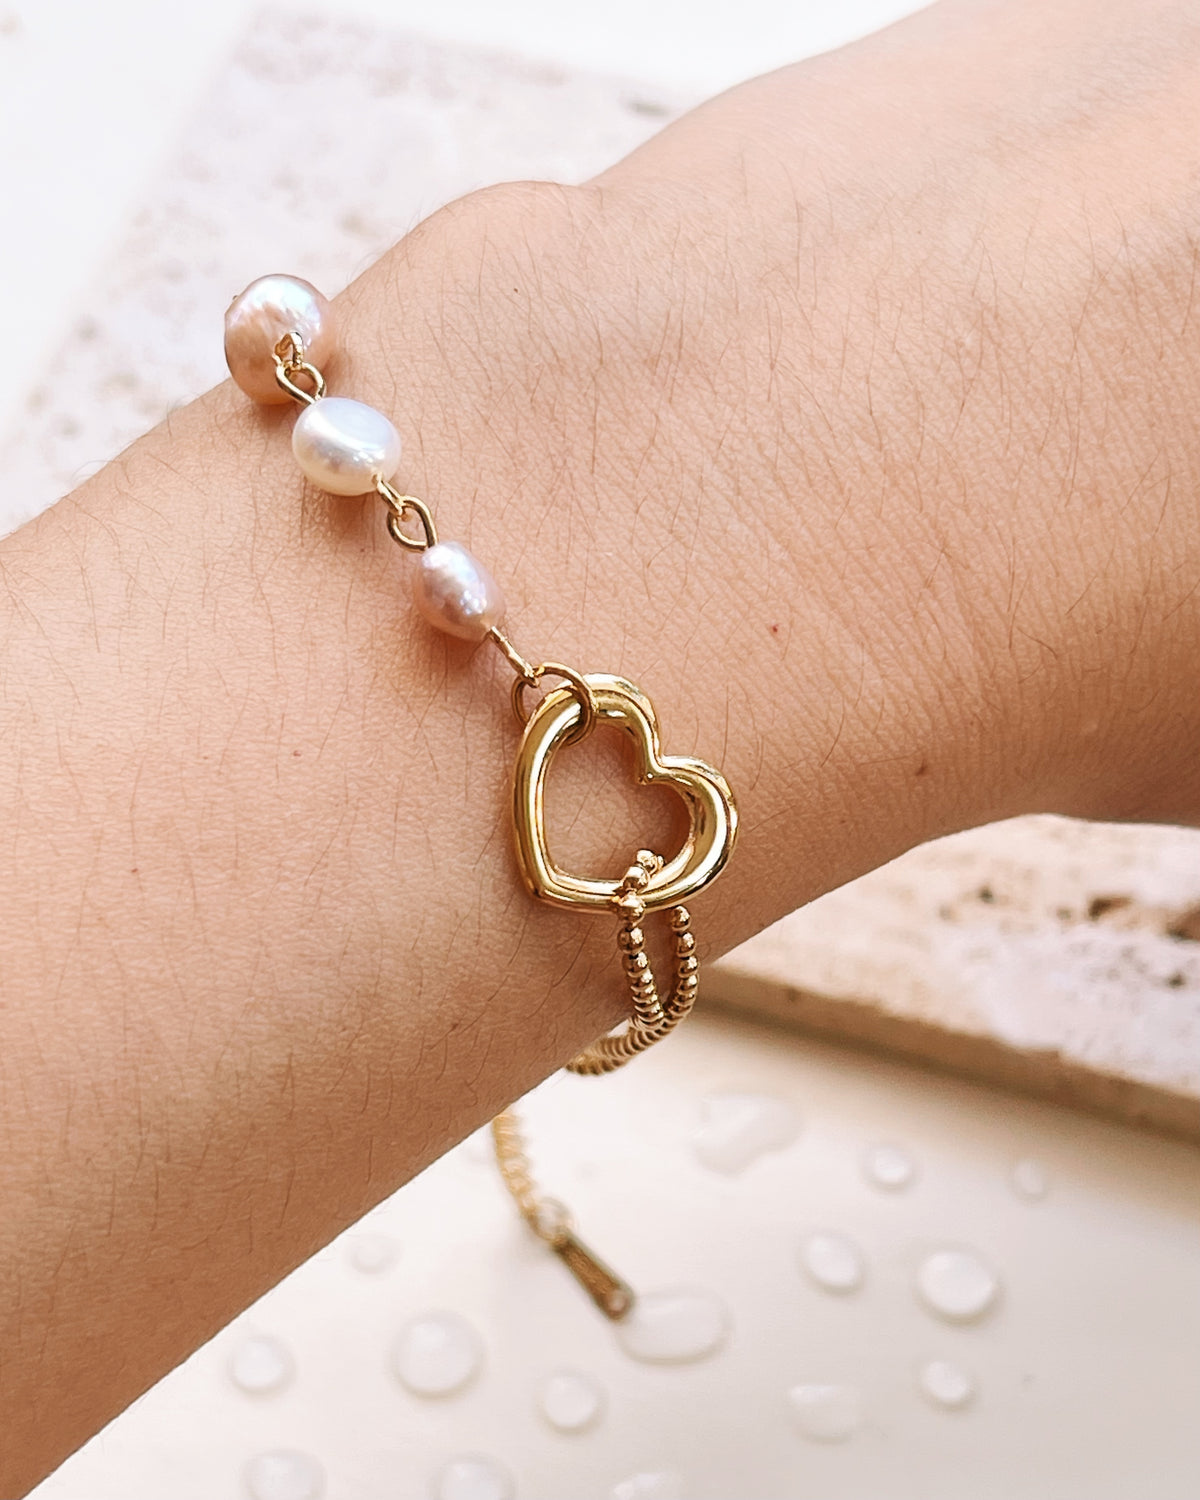 Emery Dual Design Half Paperclip Half Beads Chain with Hollow Heart Pearl Pendants Gold Bangle